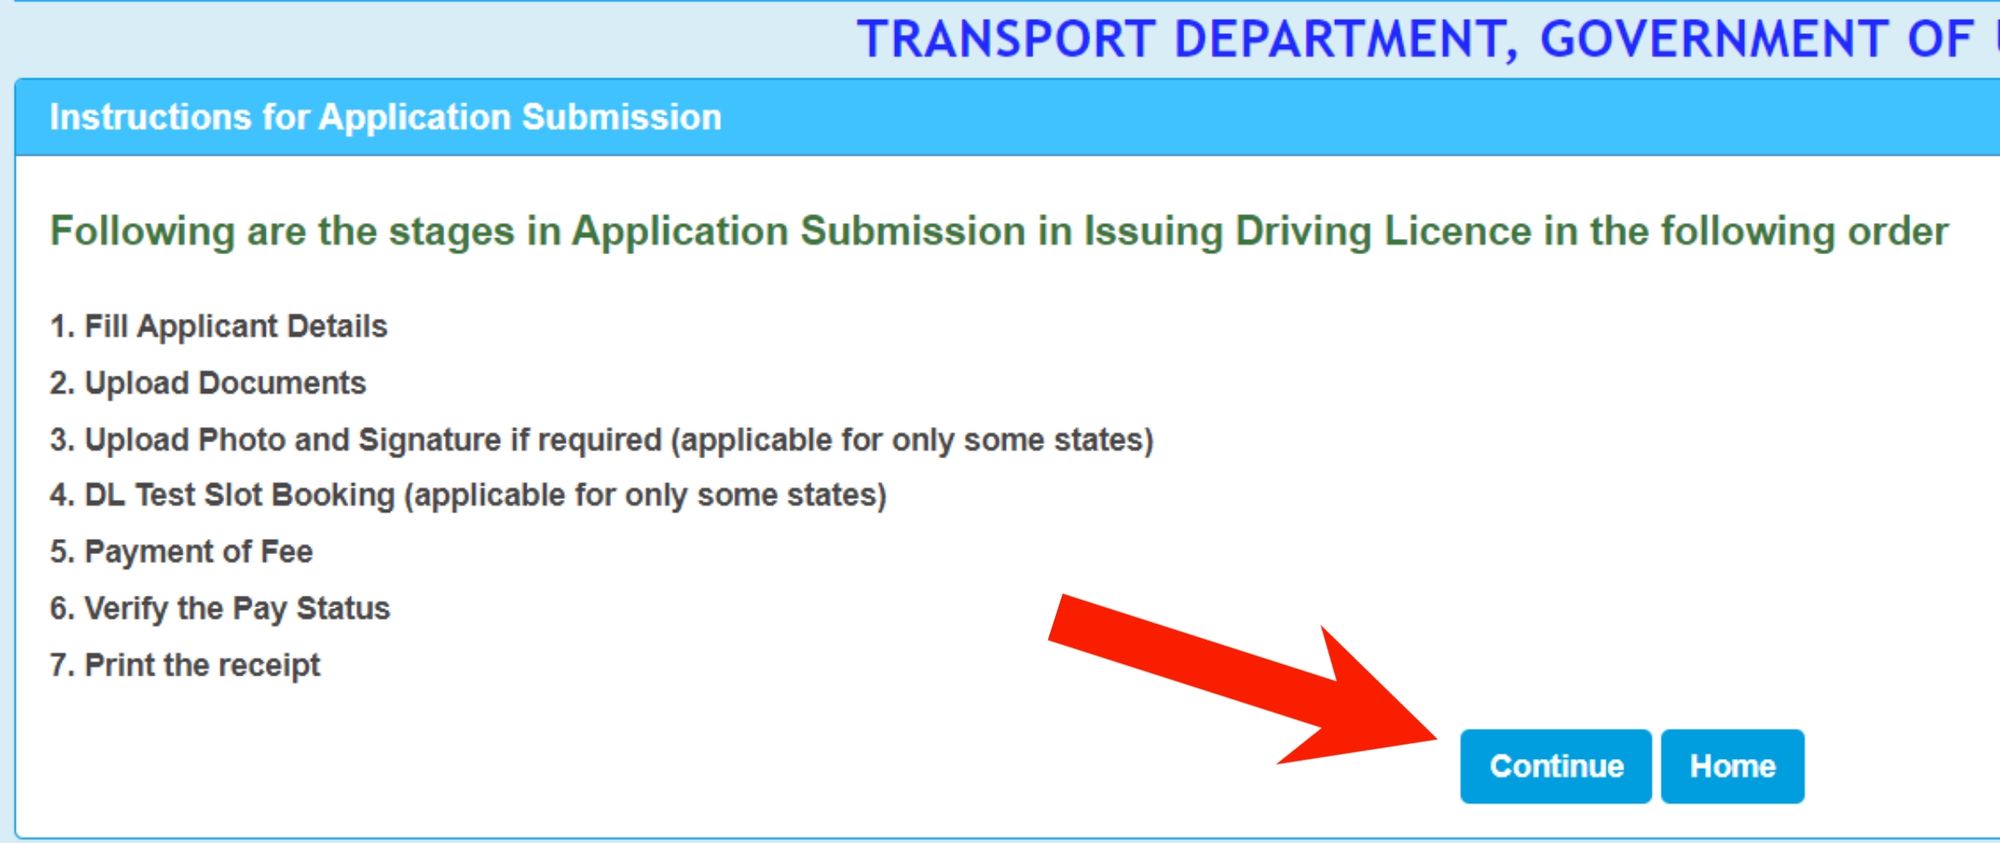 Driving Licence Application Stages